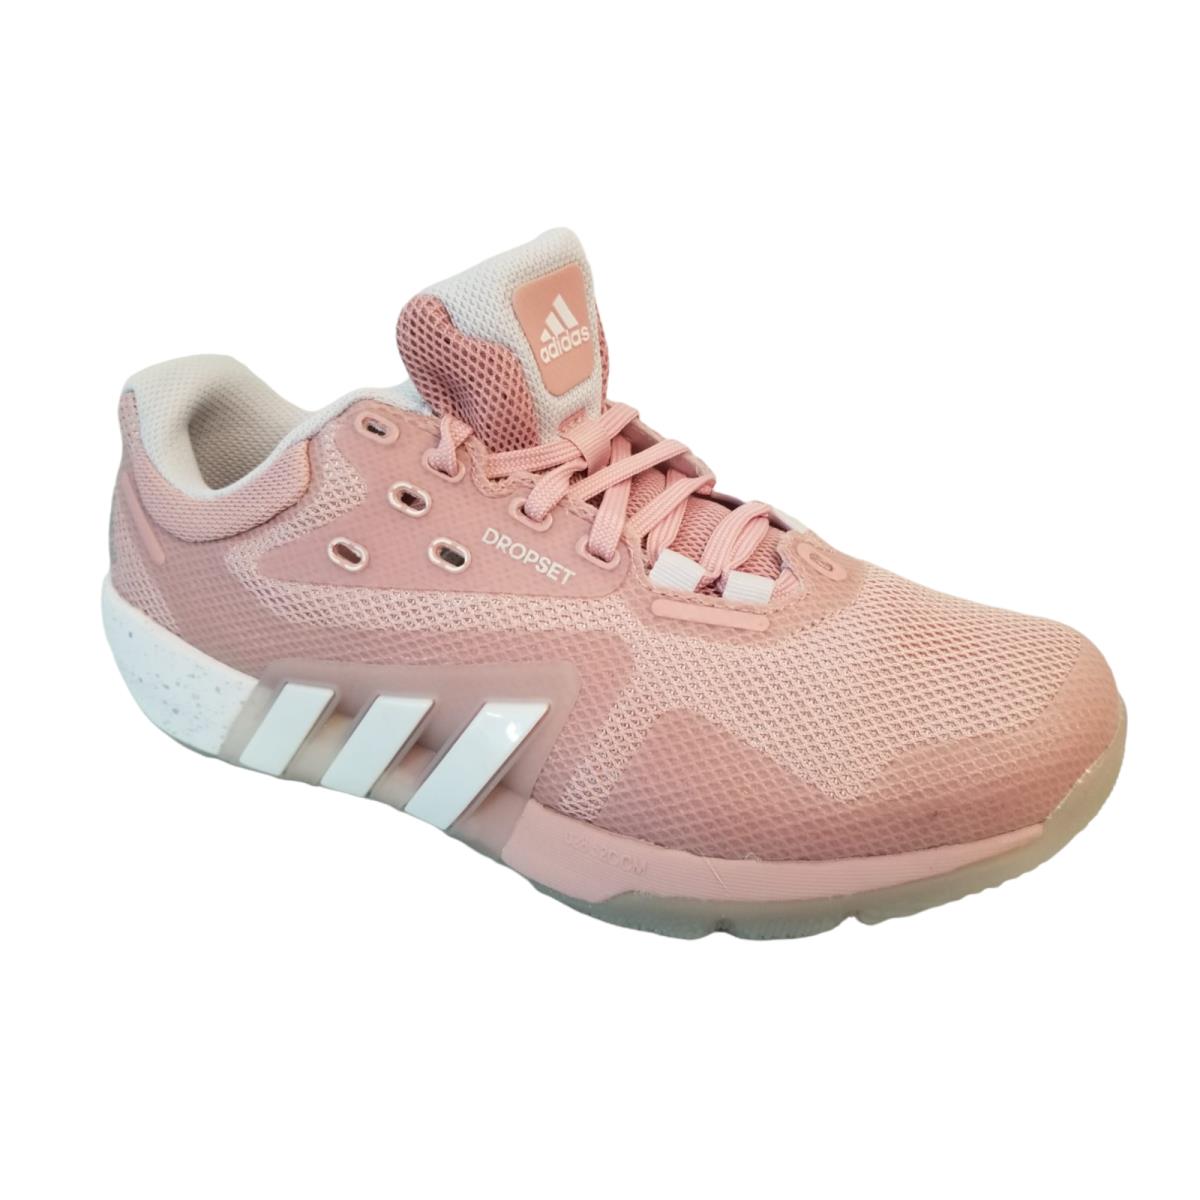 Adidas Dropset Trainer Cross Shoes Women`s Size 7 Pink